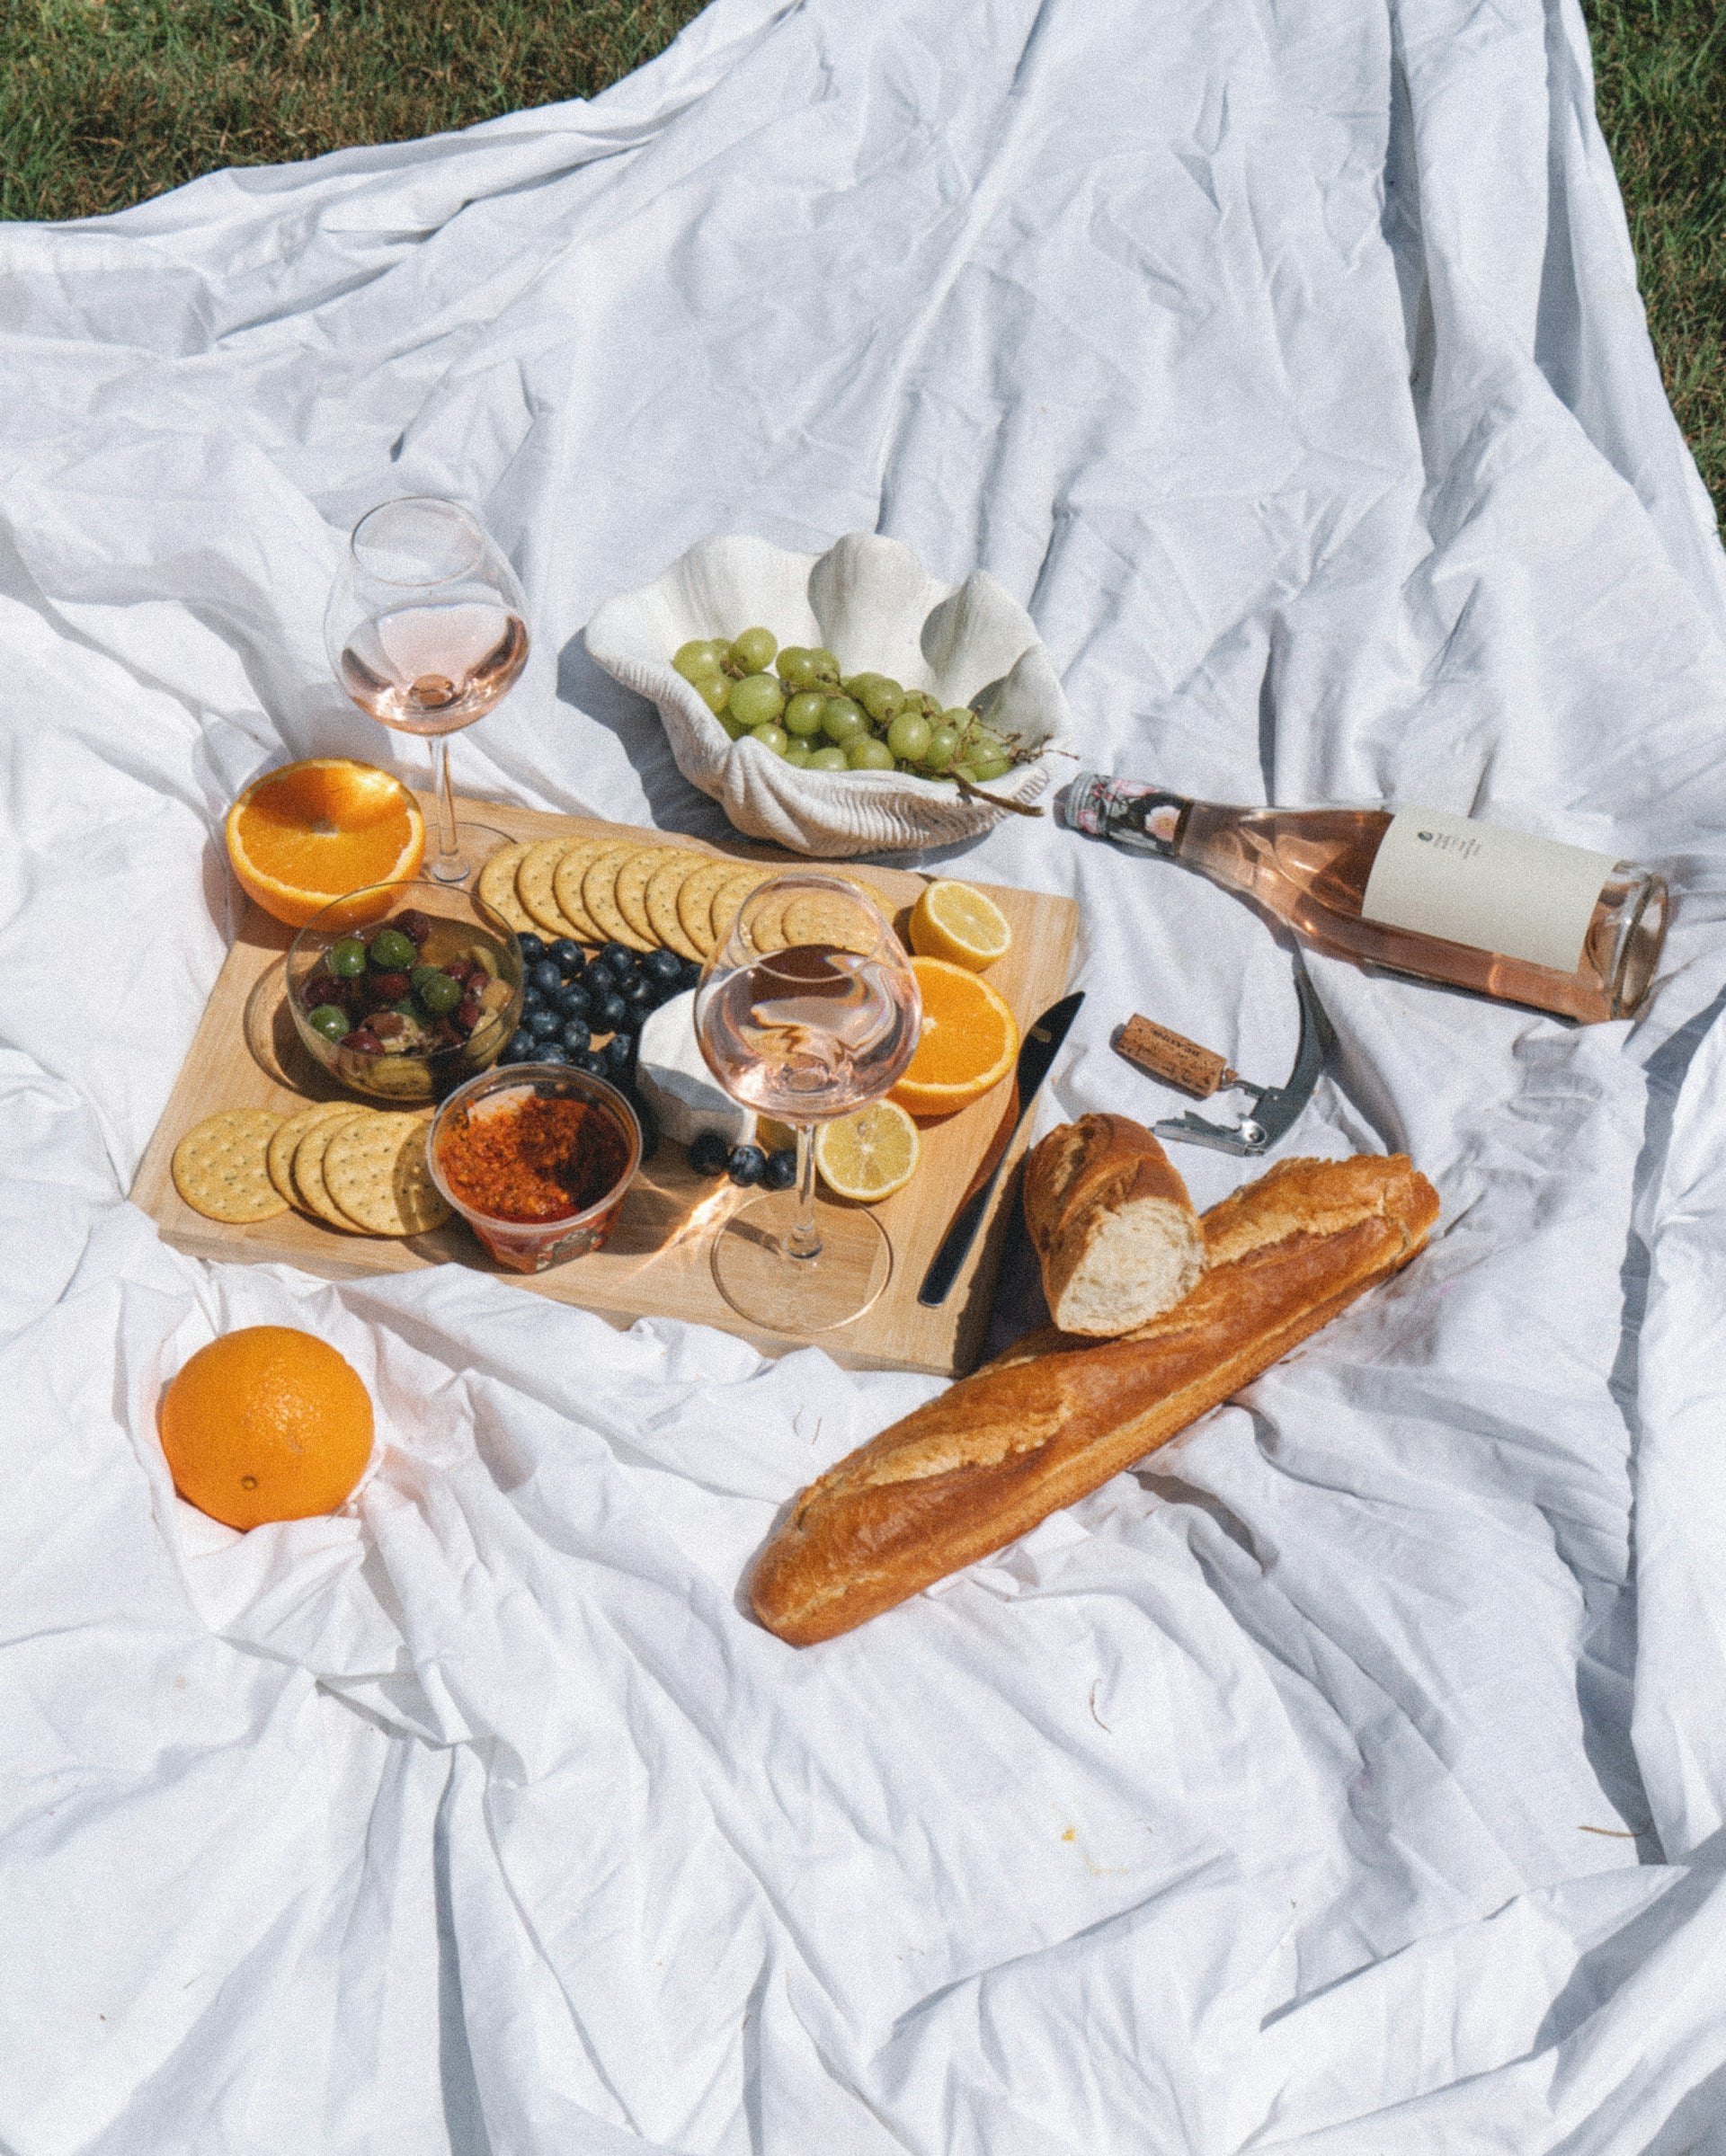 wine of the month club monthly wine subscription picnic